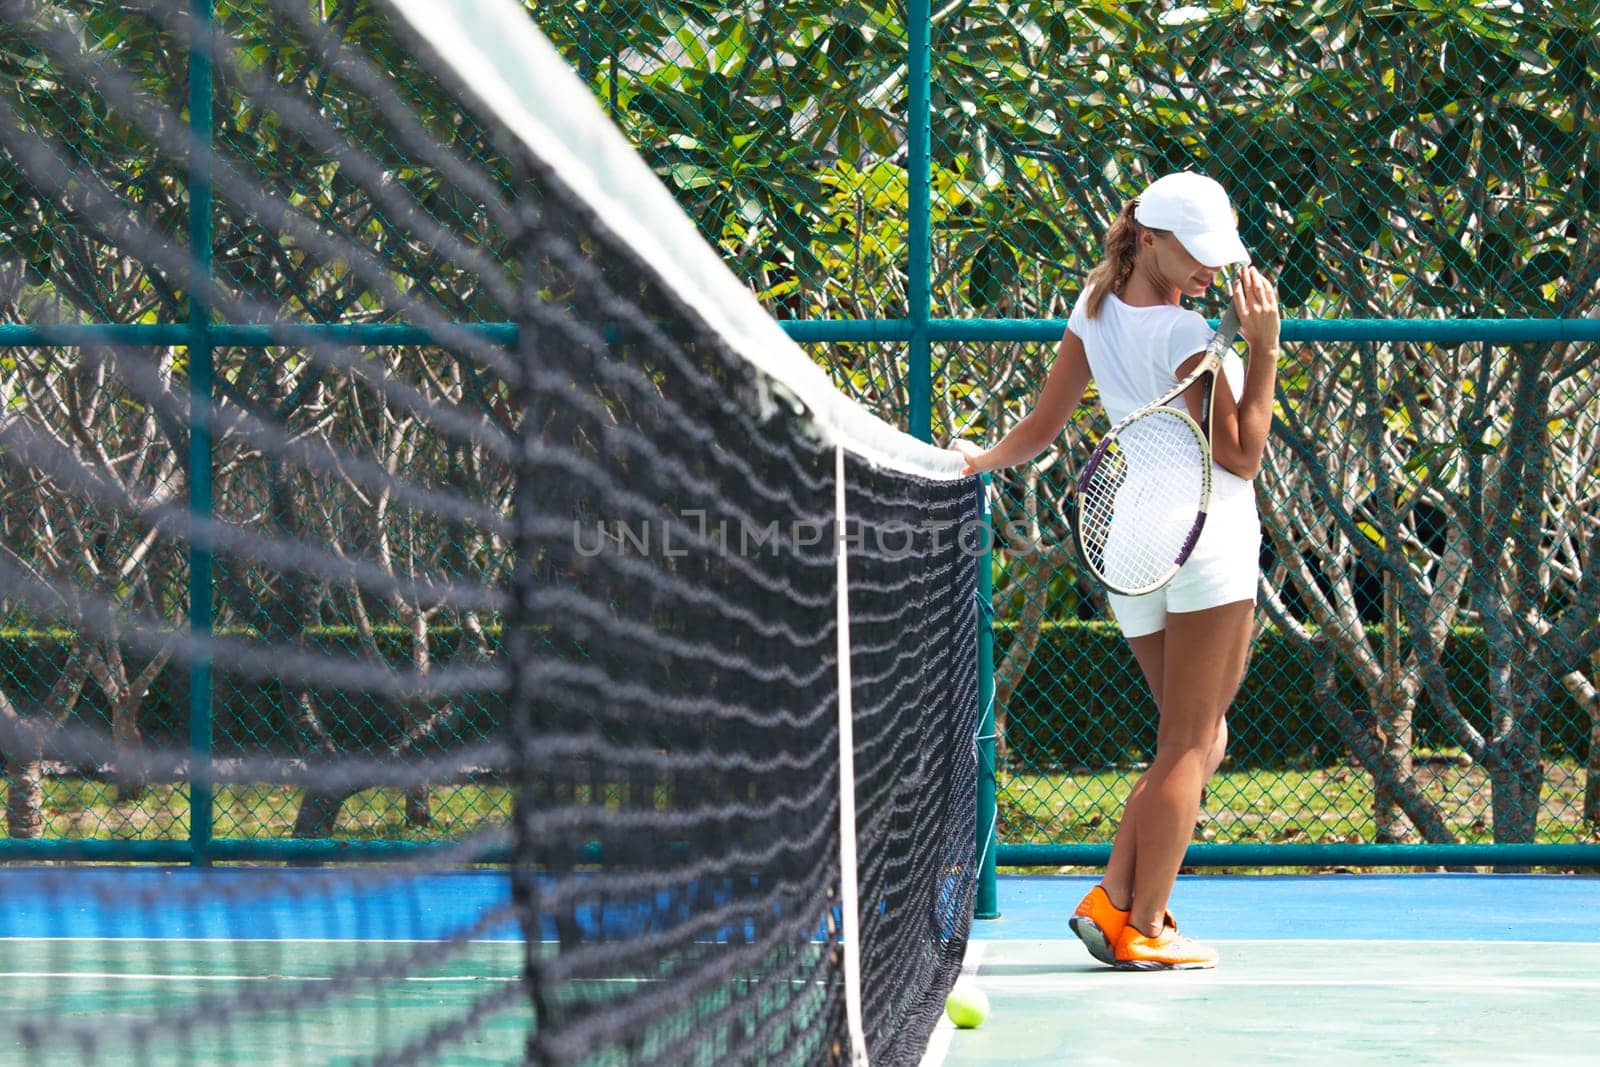 Female tennis player on court